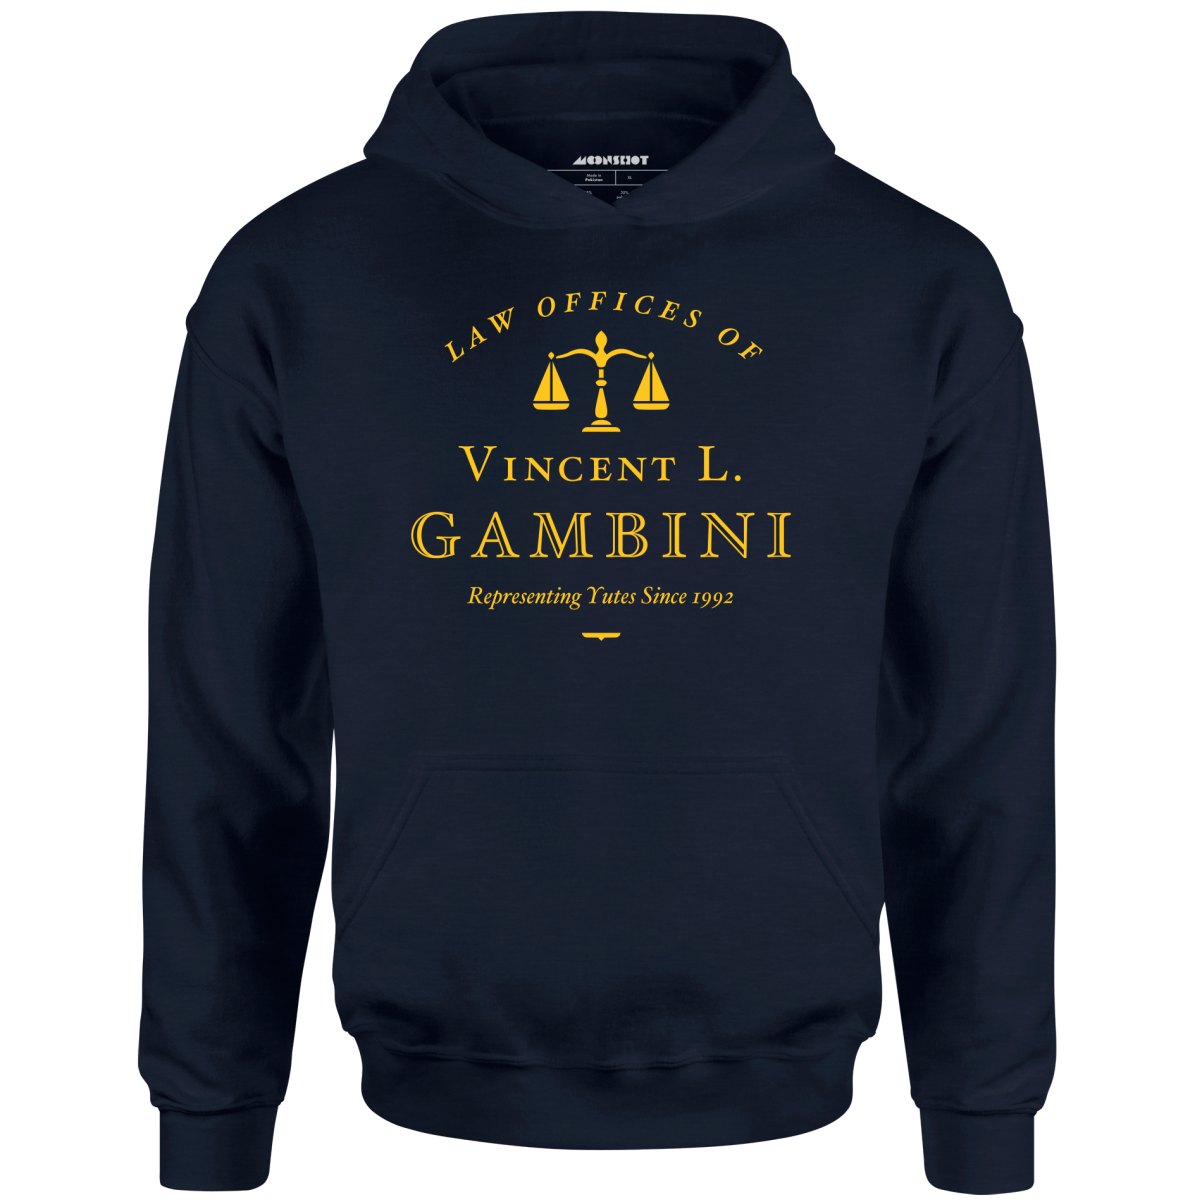 Law Offices of Vincent L. Gambini - Unisex Hoodie